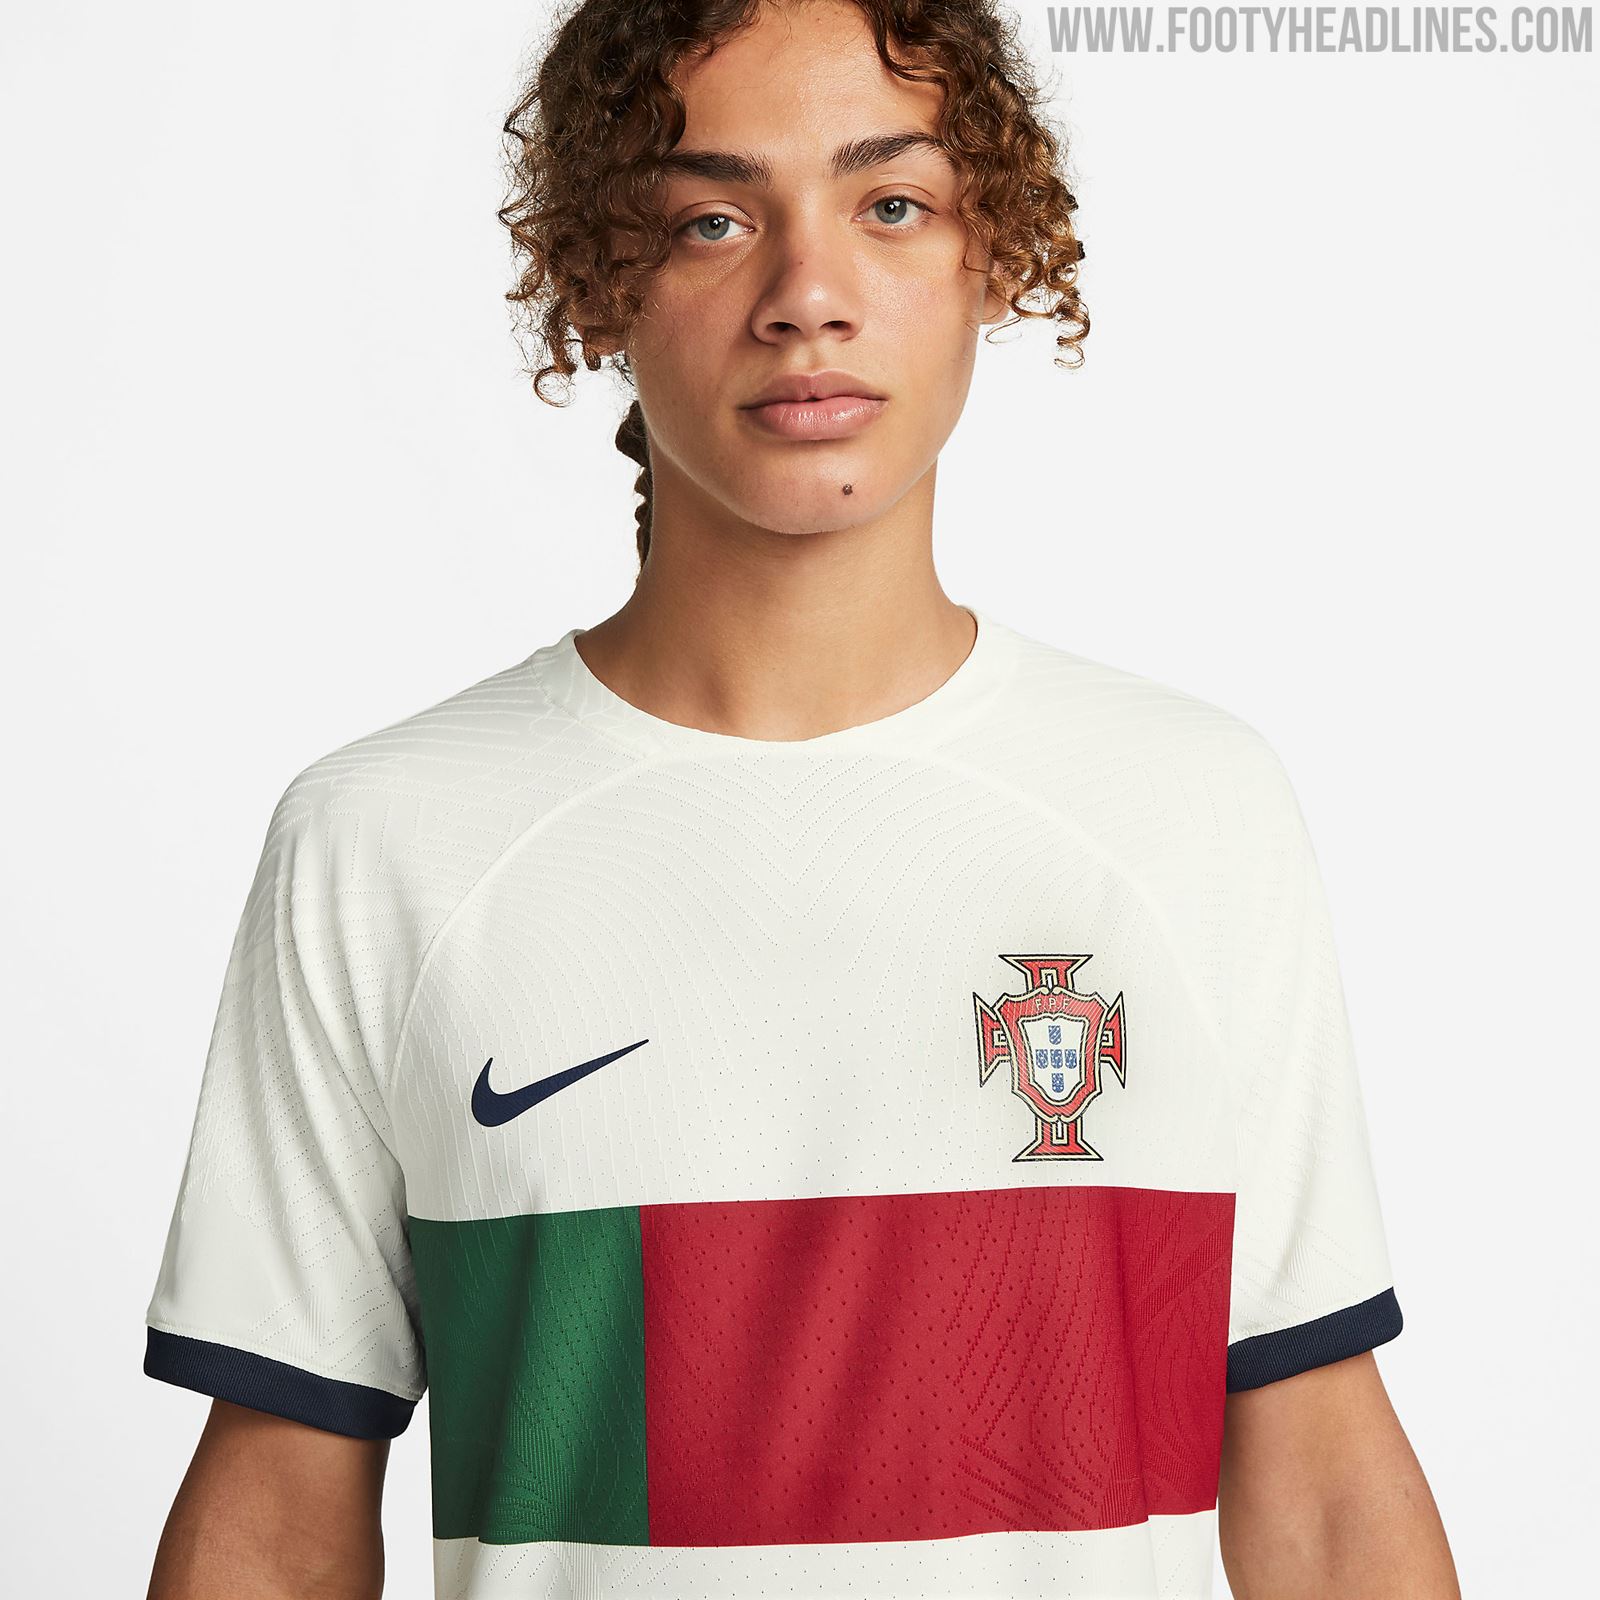 Portugal World Cup Home & Kits - Footy Headlines